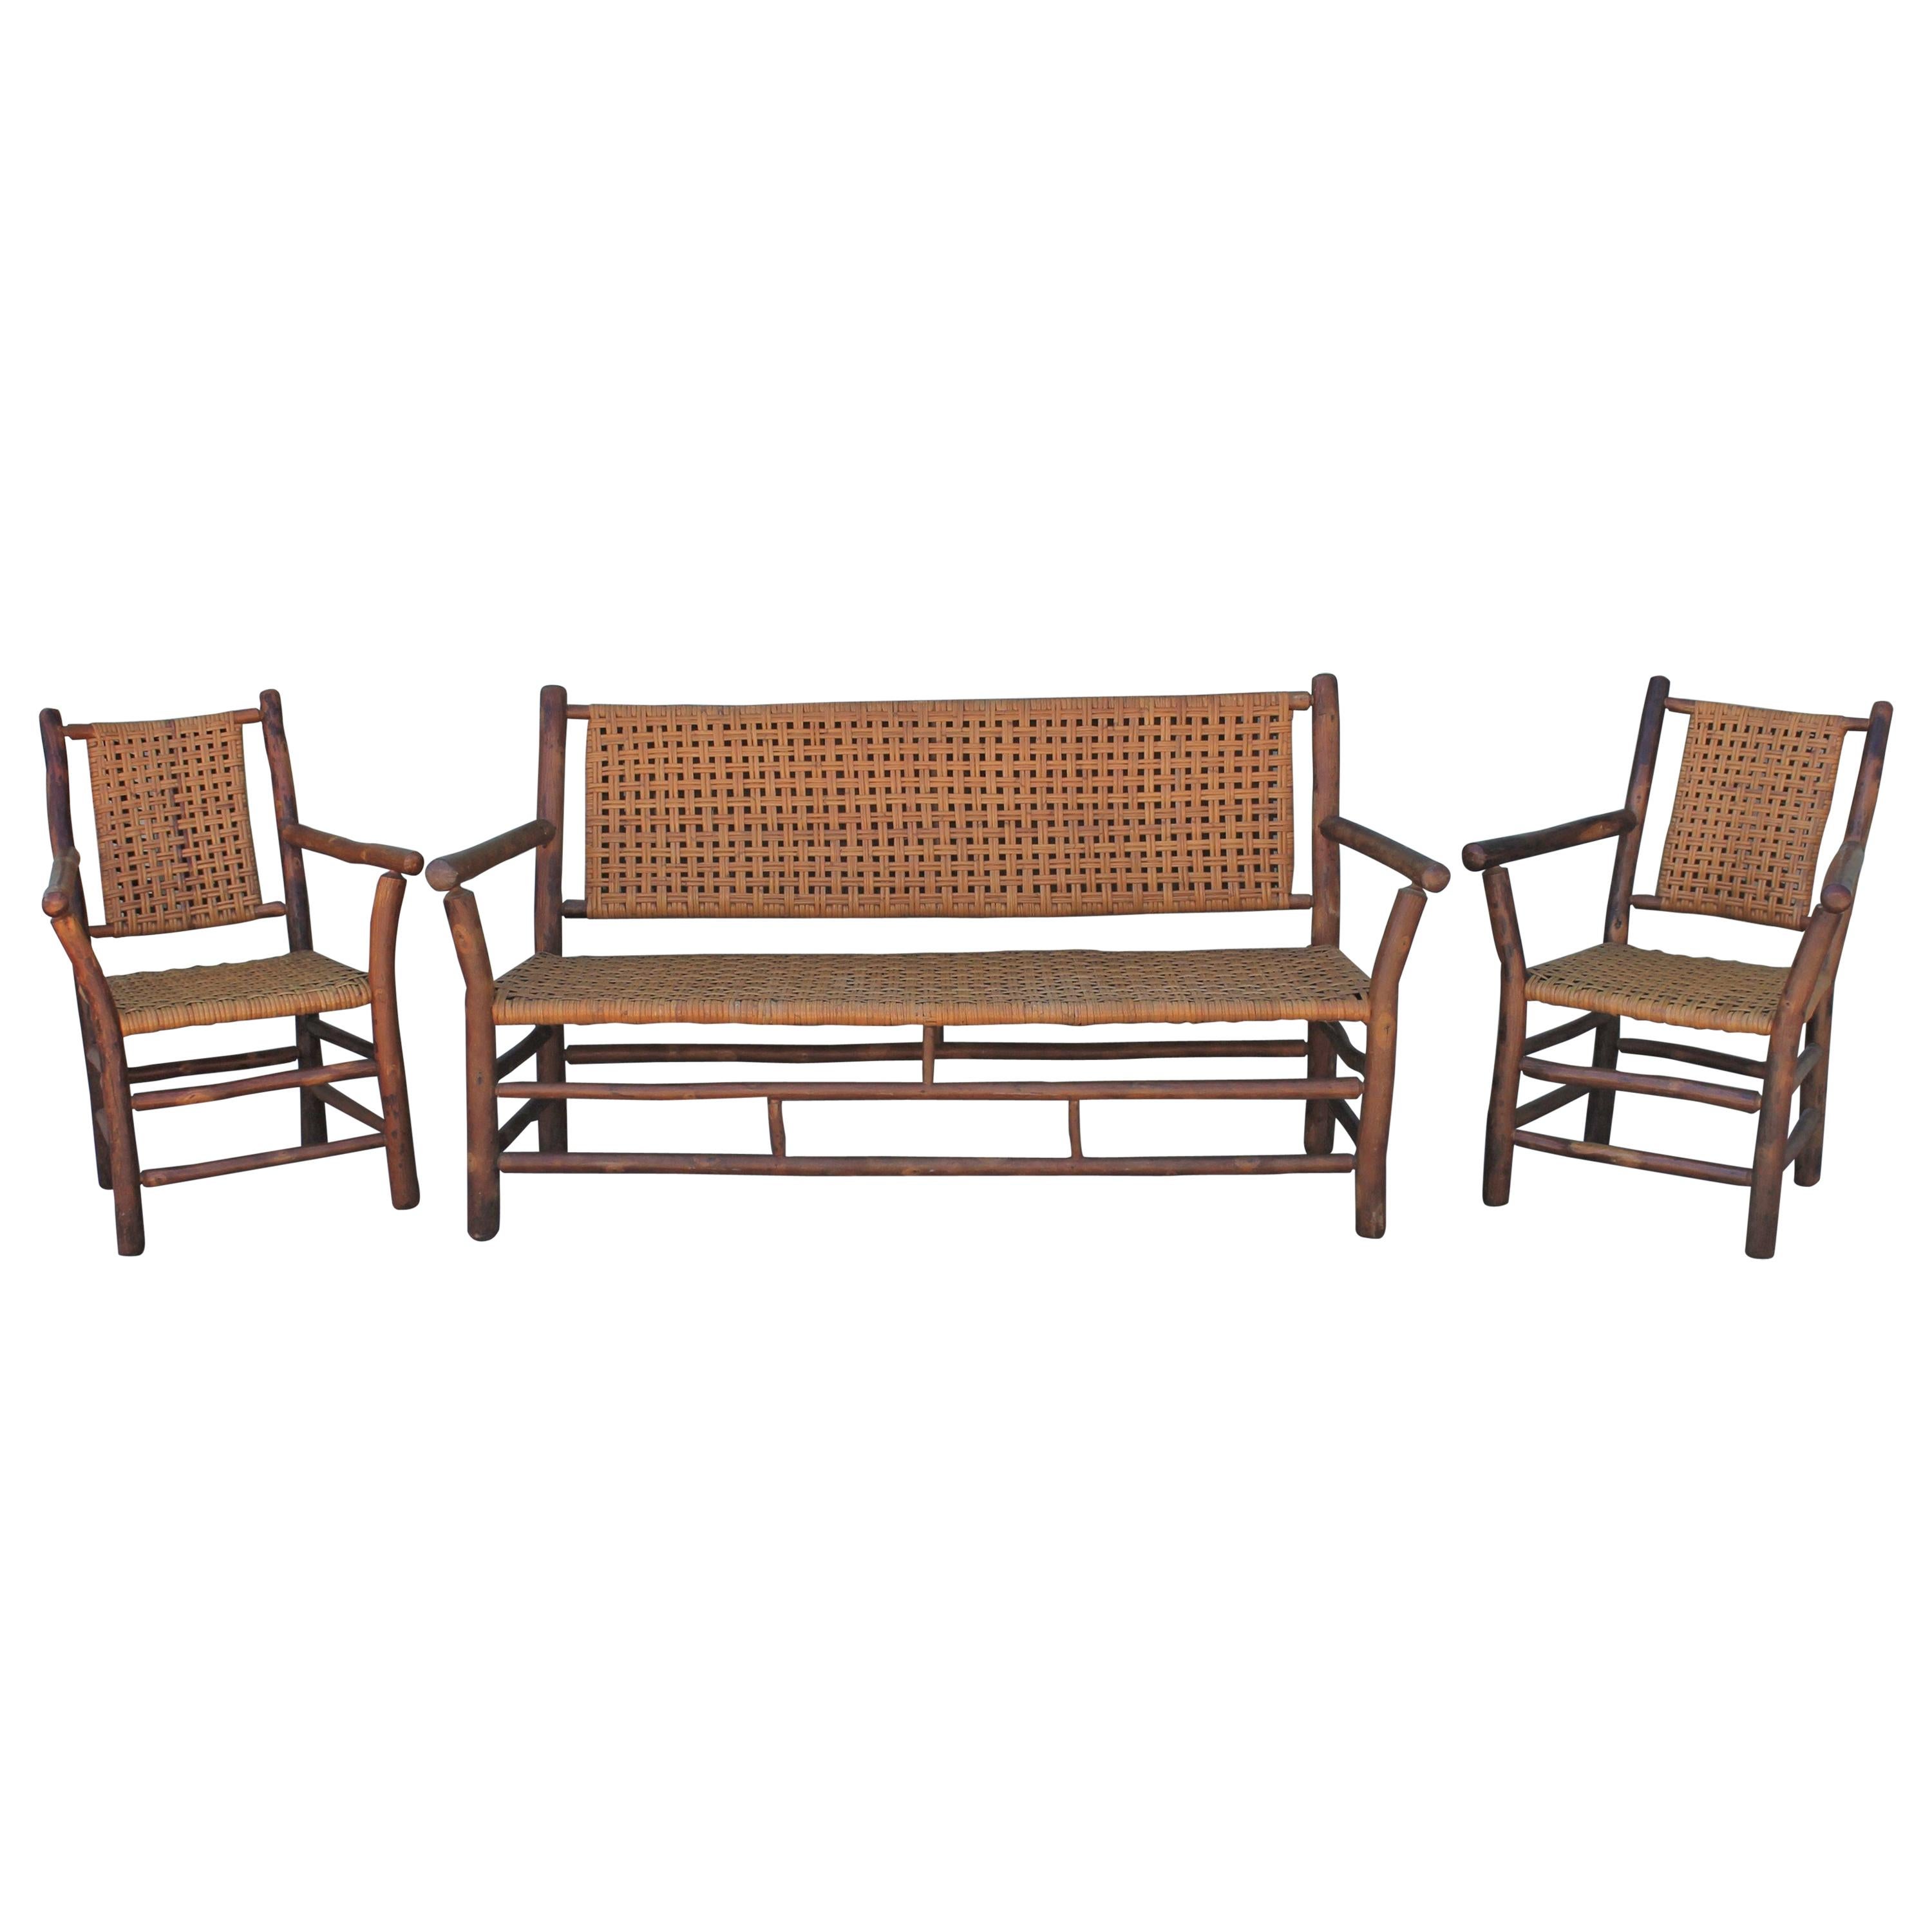 Set of 3 Old Hickory Furniture Co. Settee and Chairs